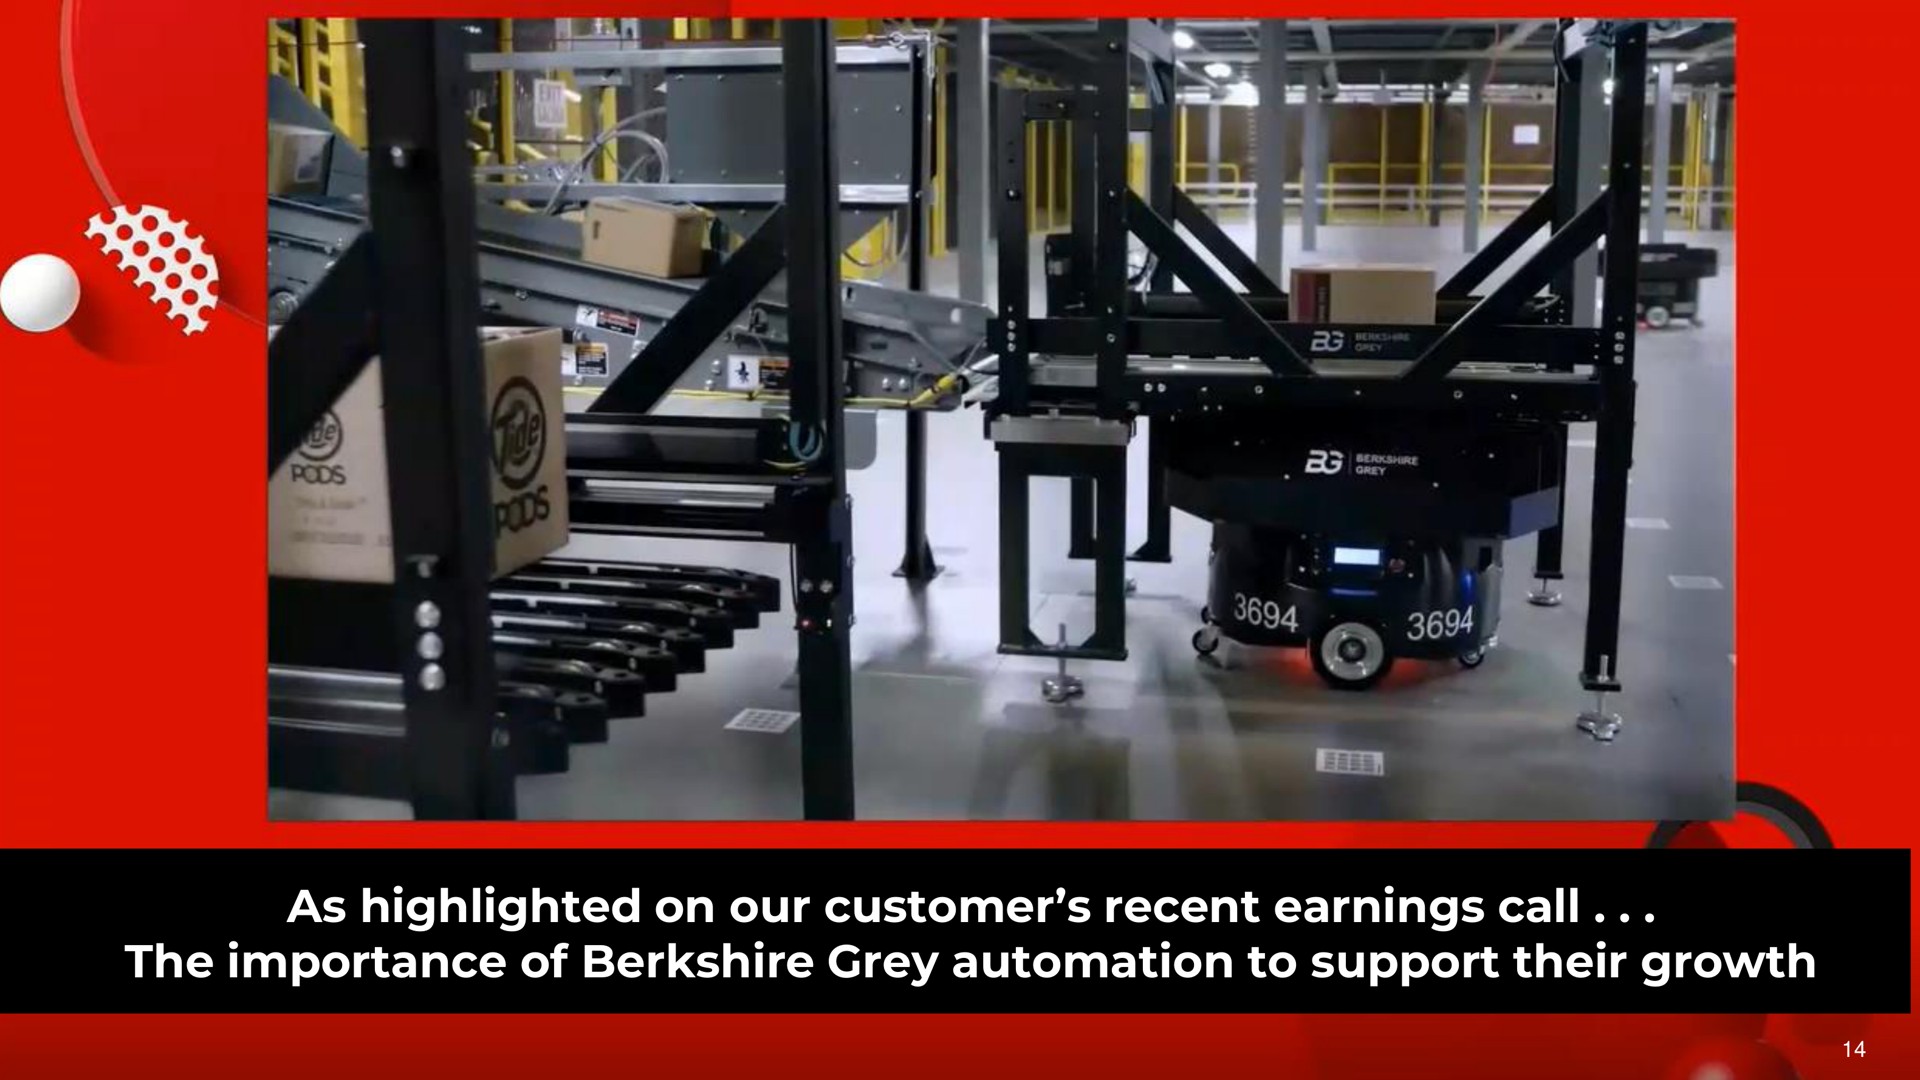 as highlighted on our customer recent earnings call the importance of grey to support their growth | Berkshire Grey